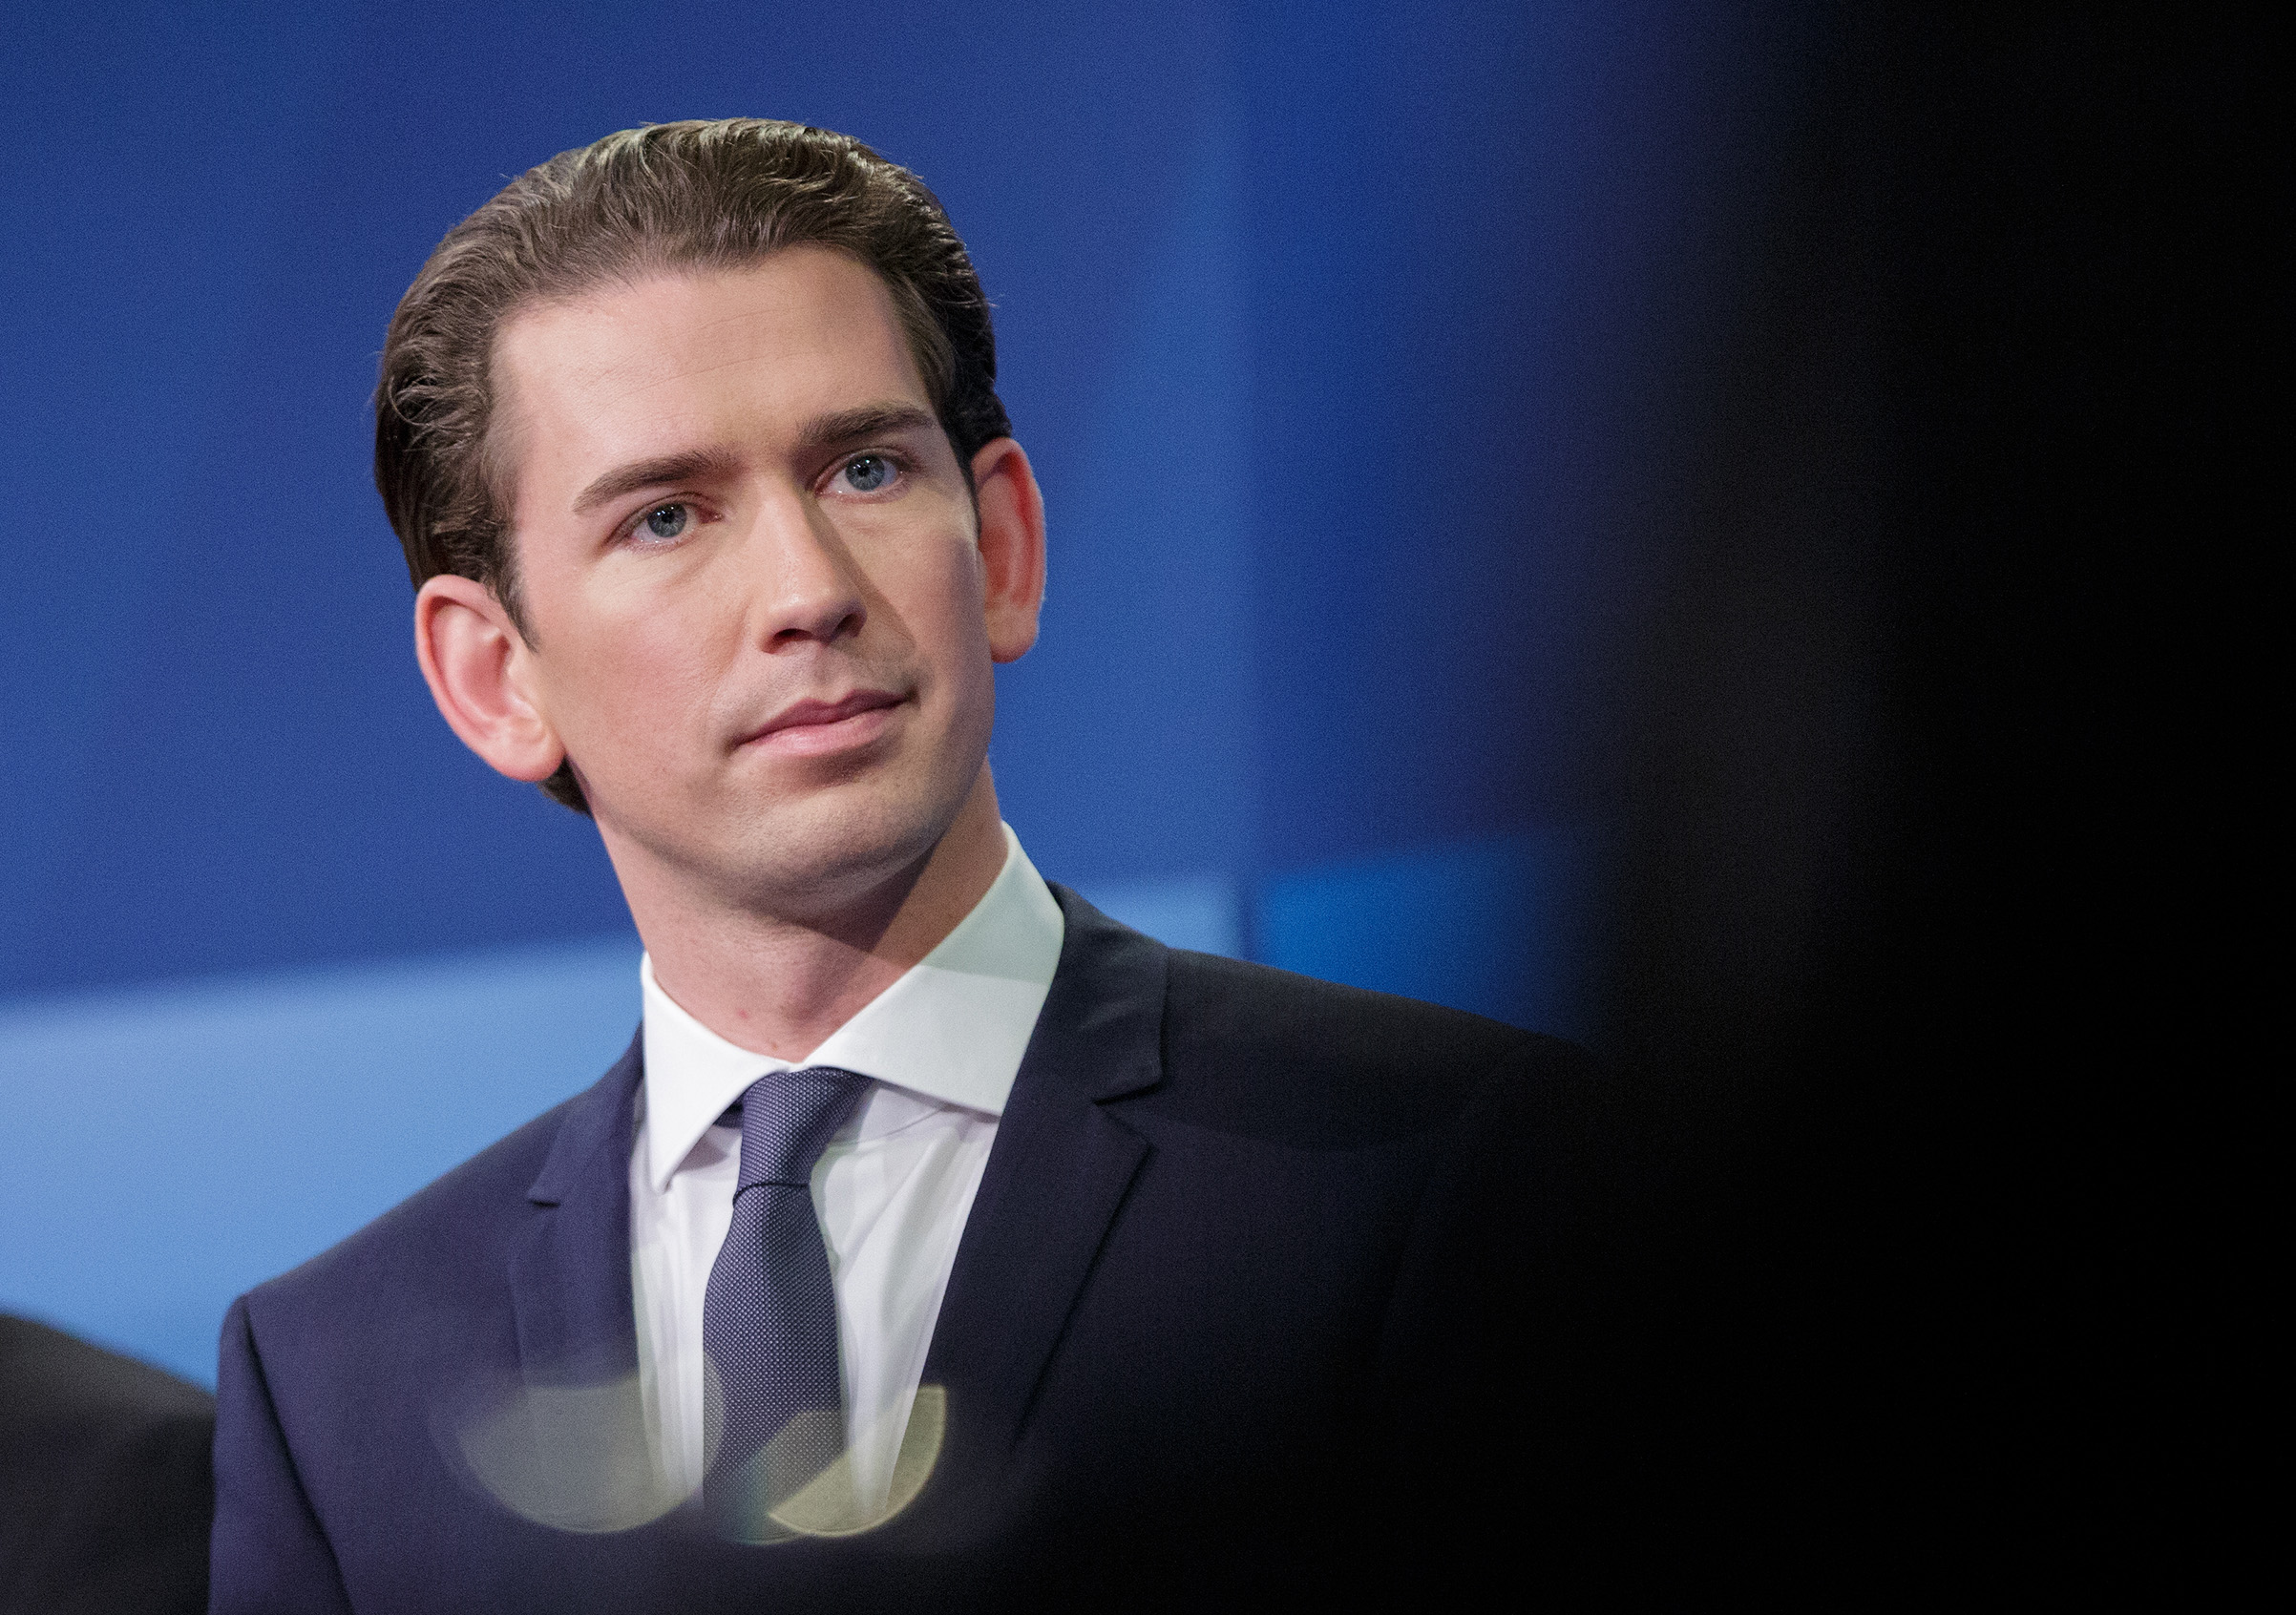 Sebastian Kurz, Austria's foreign minister and leader of the People's Party, participates in a television debate ahead of a federal election in Vienna, Austria, on Oct. 15, 2017.